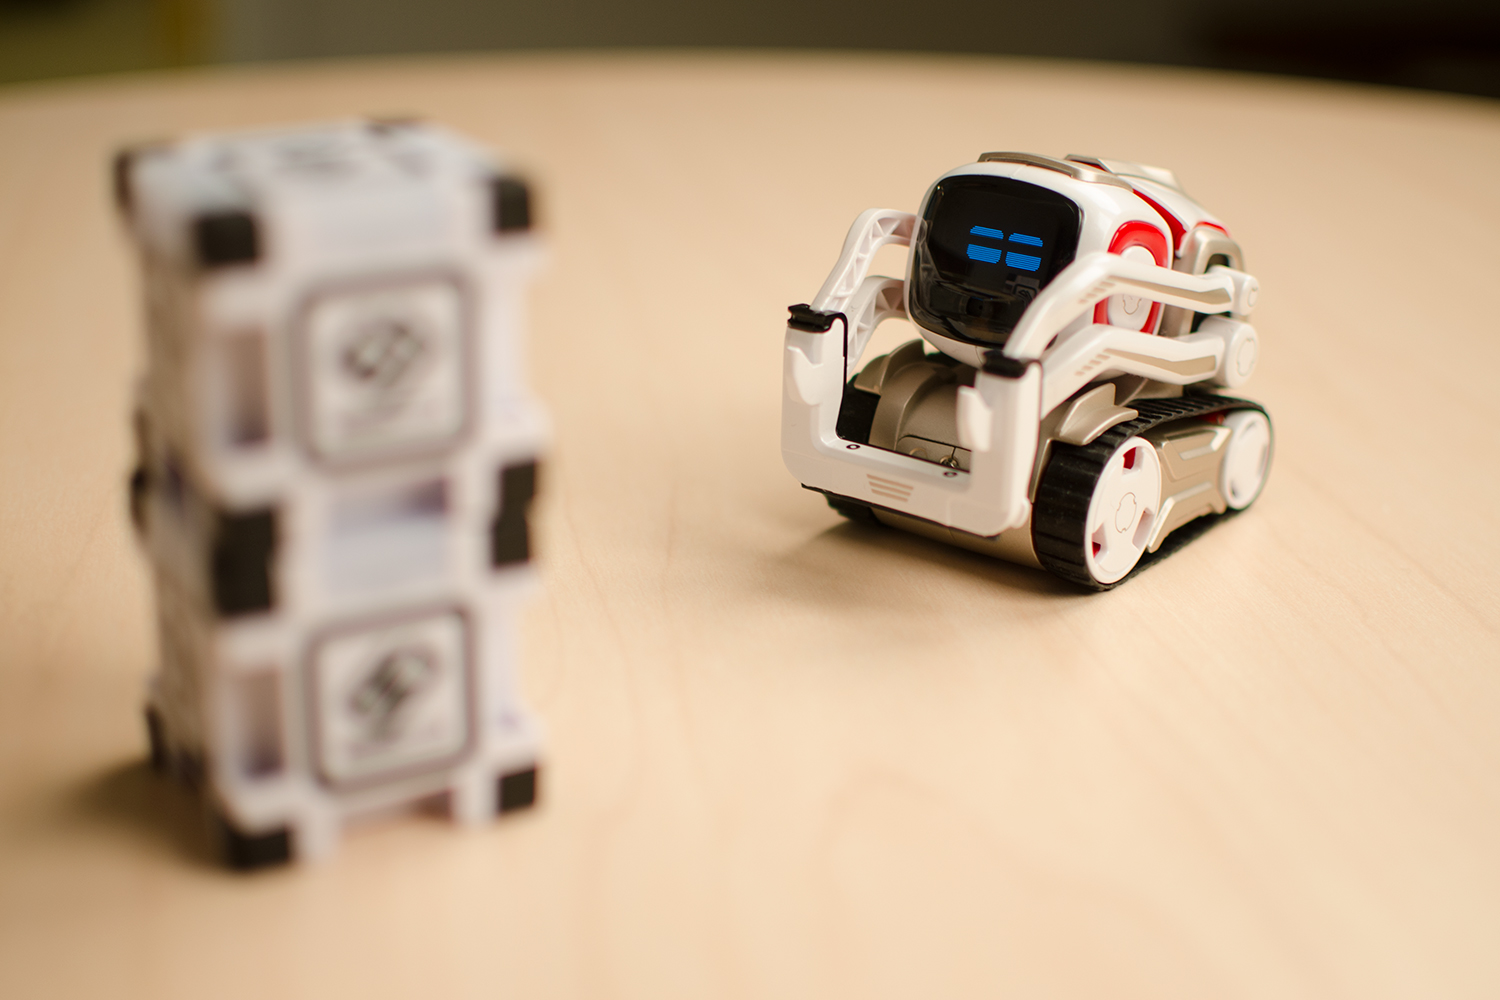 Cozmo' a high tech toy for the present and future